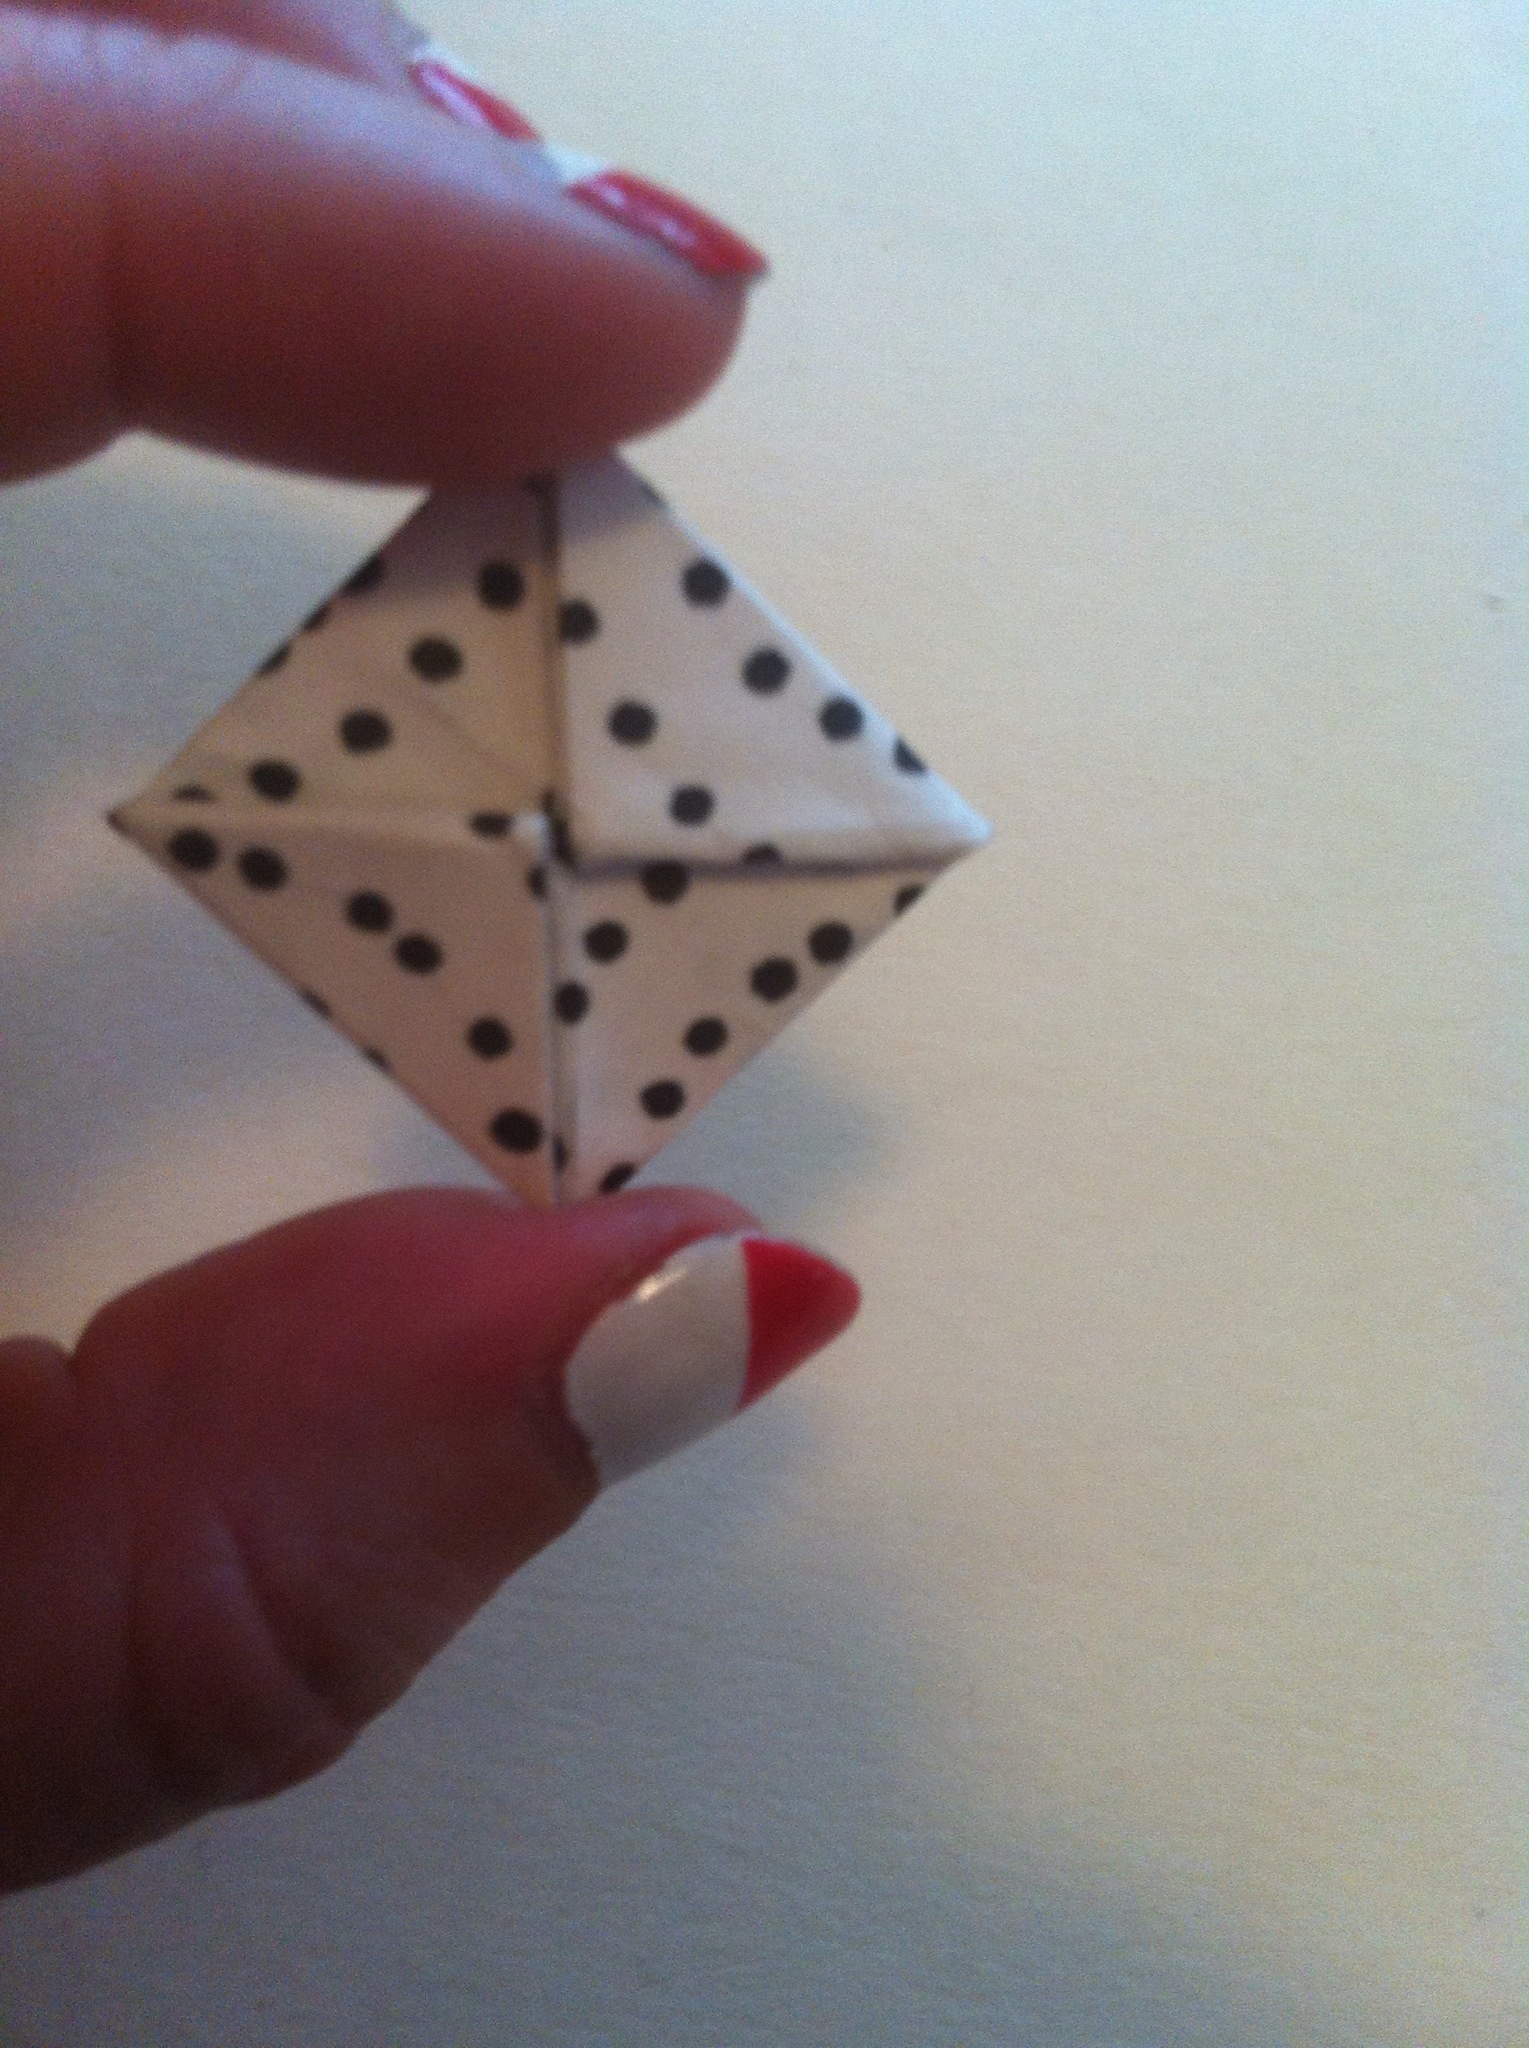 How to make a paper Dice? 